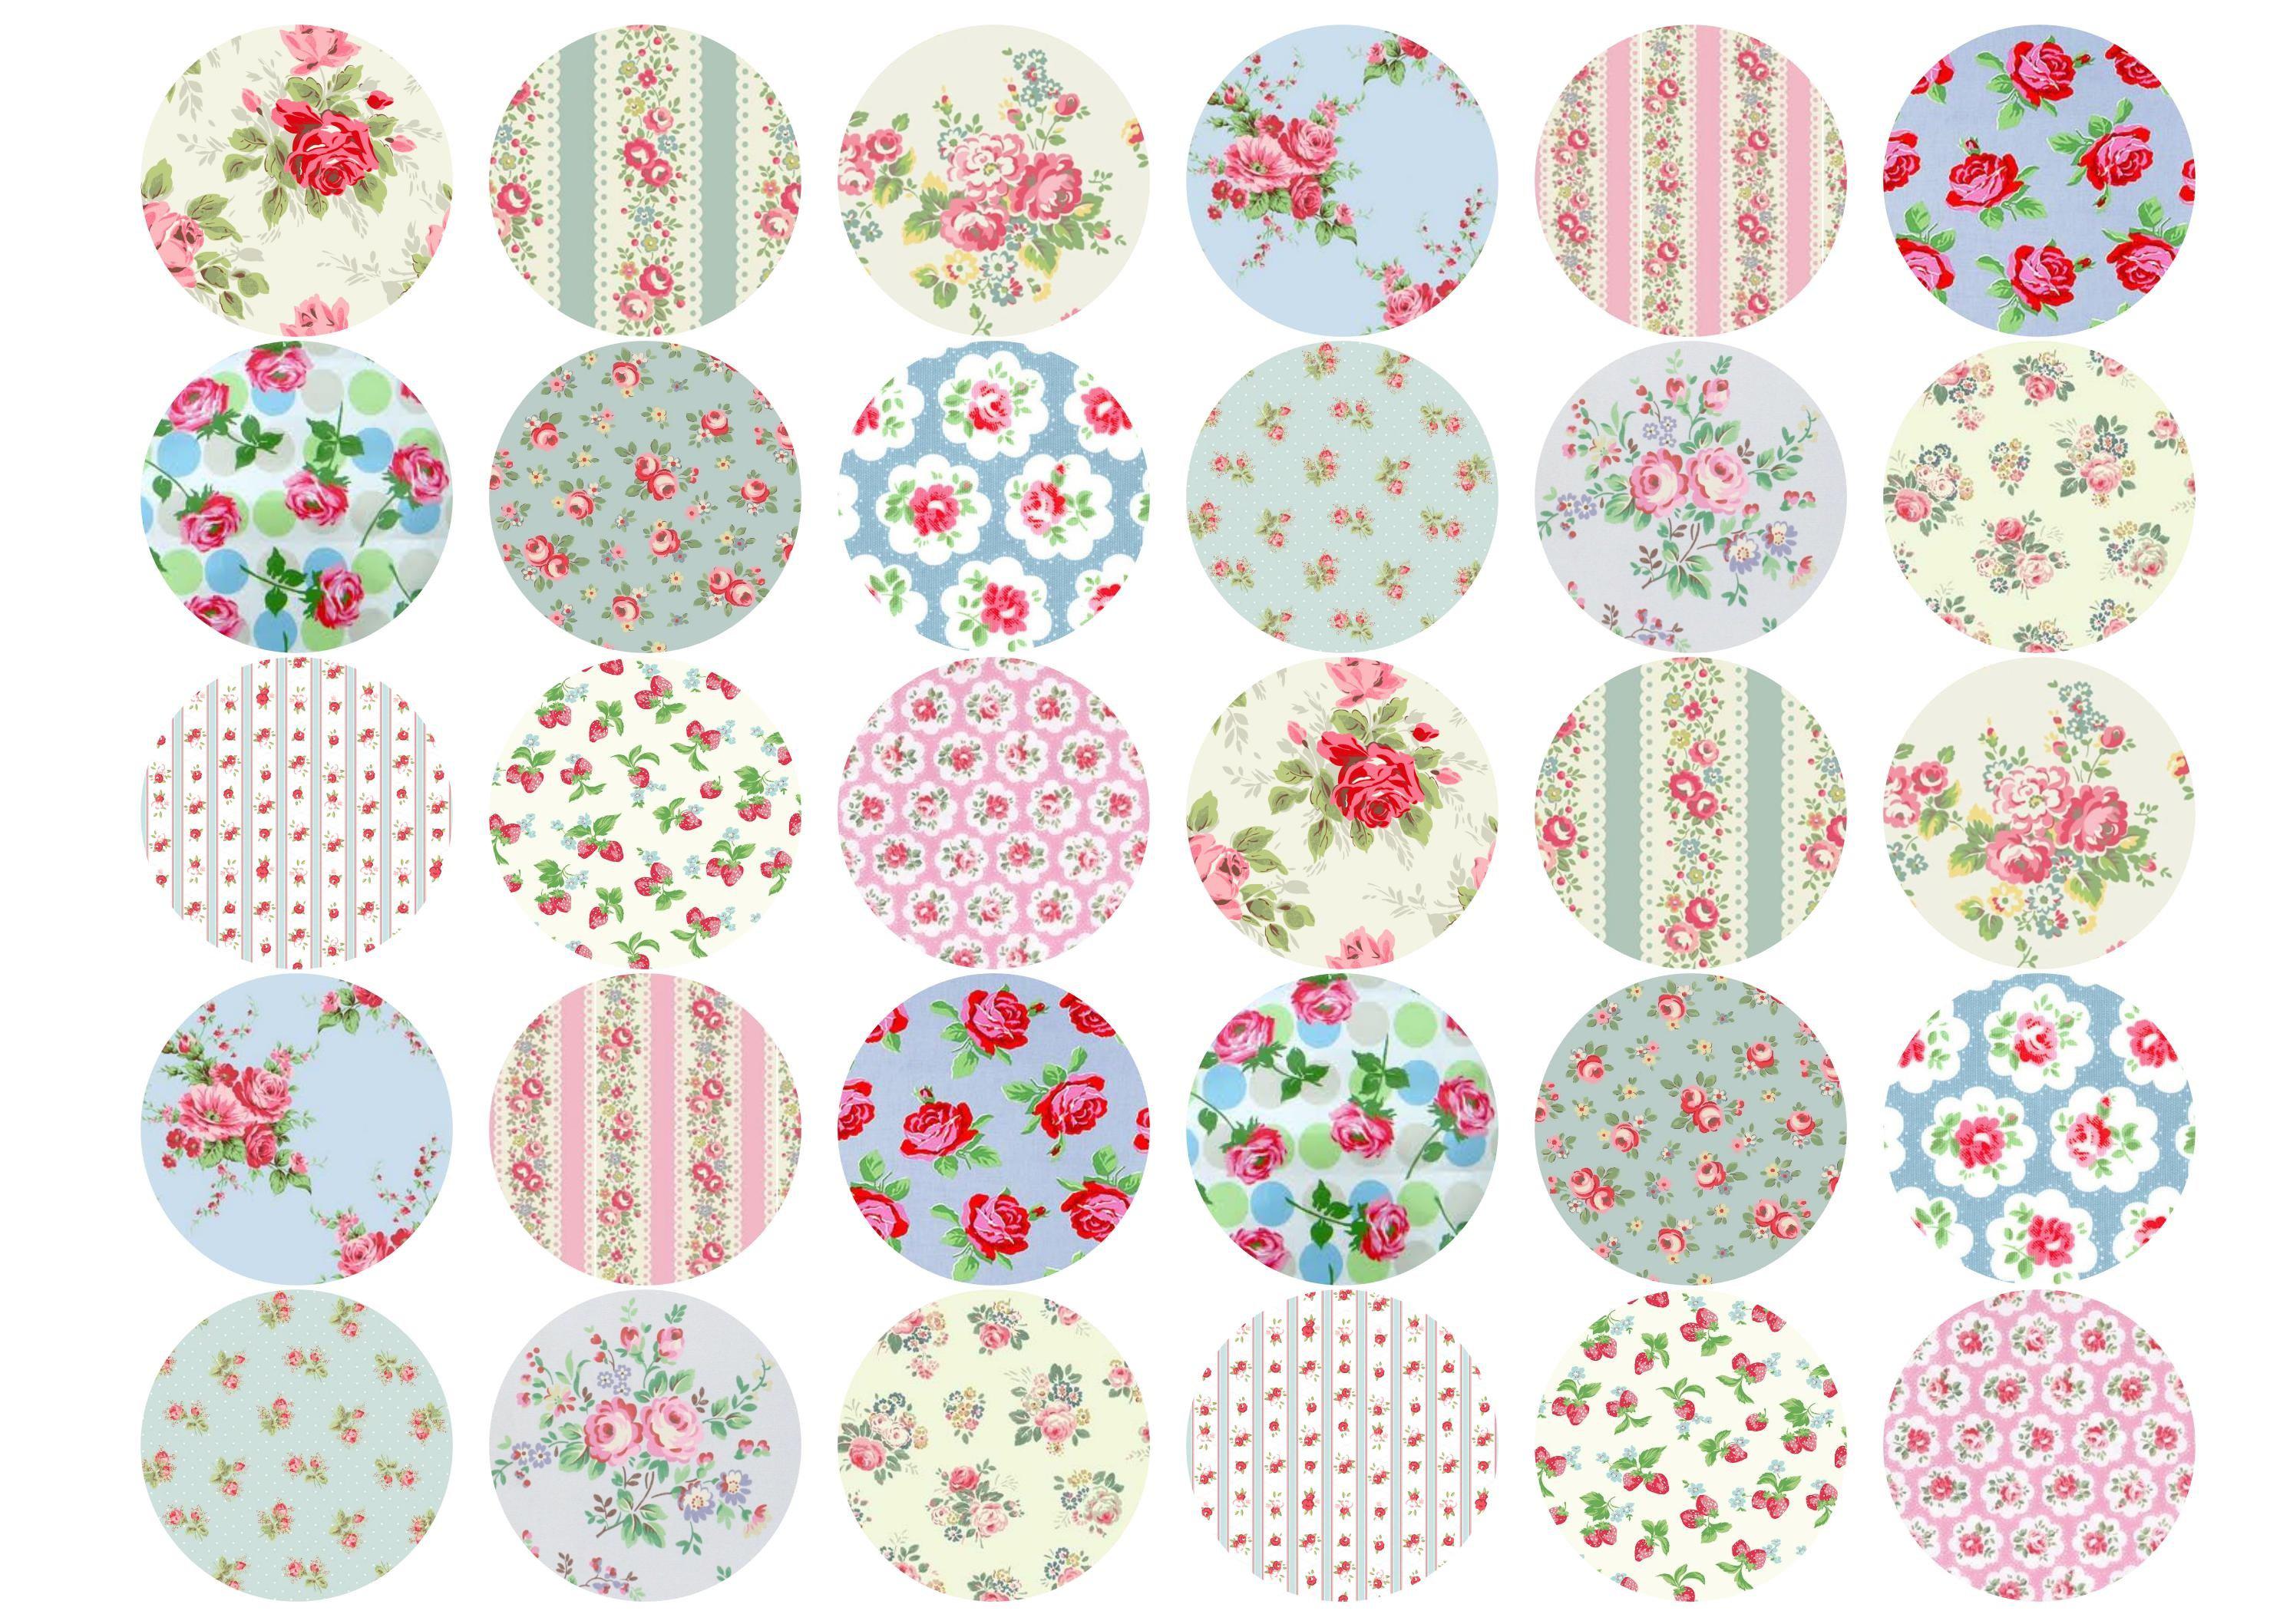 Edible cupcake toppers with Cath Kidston style designs